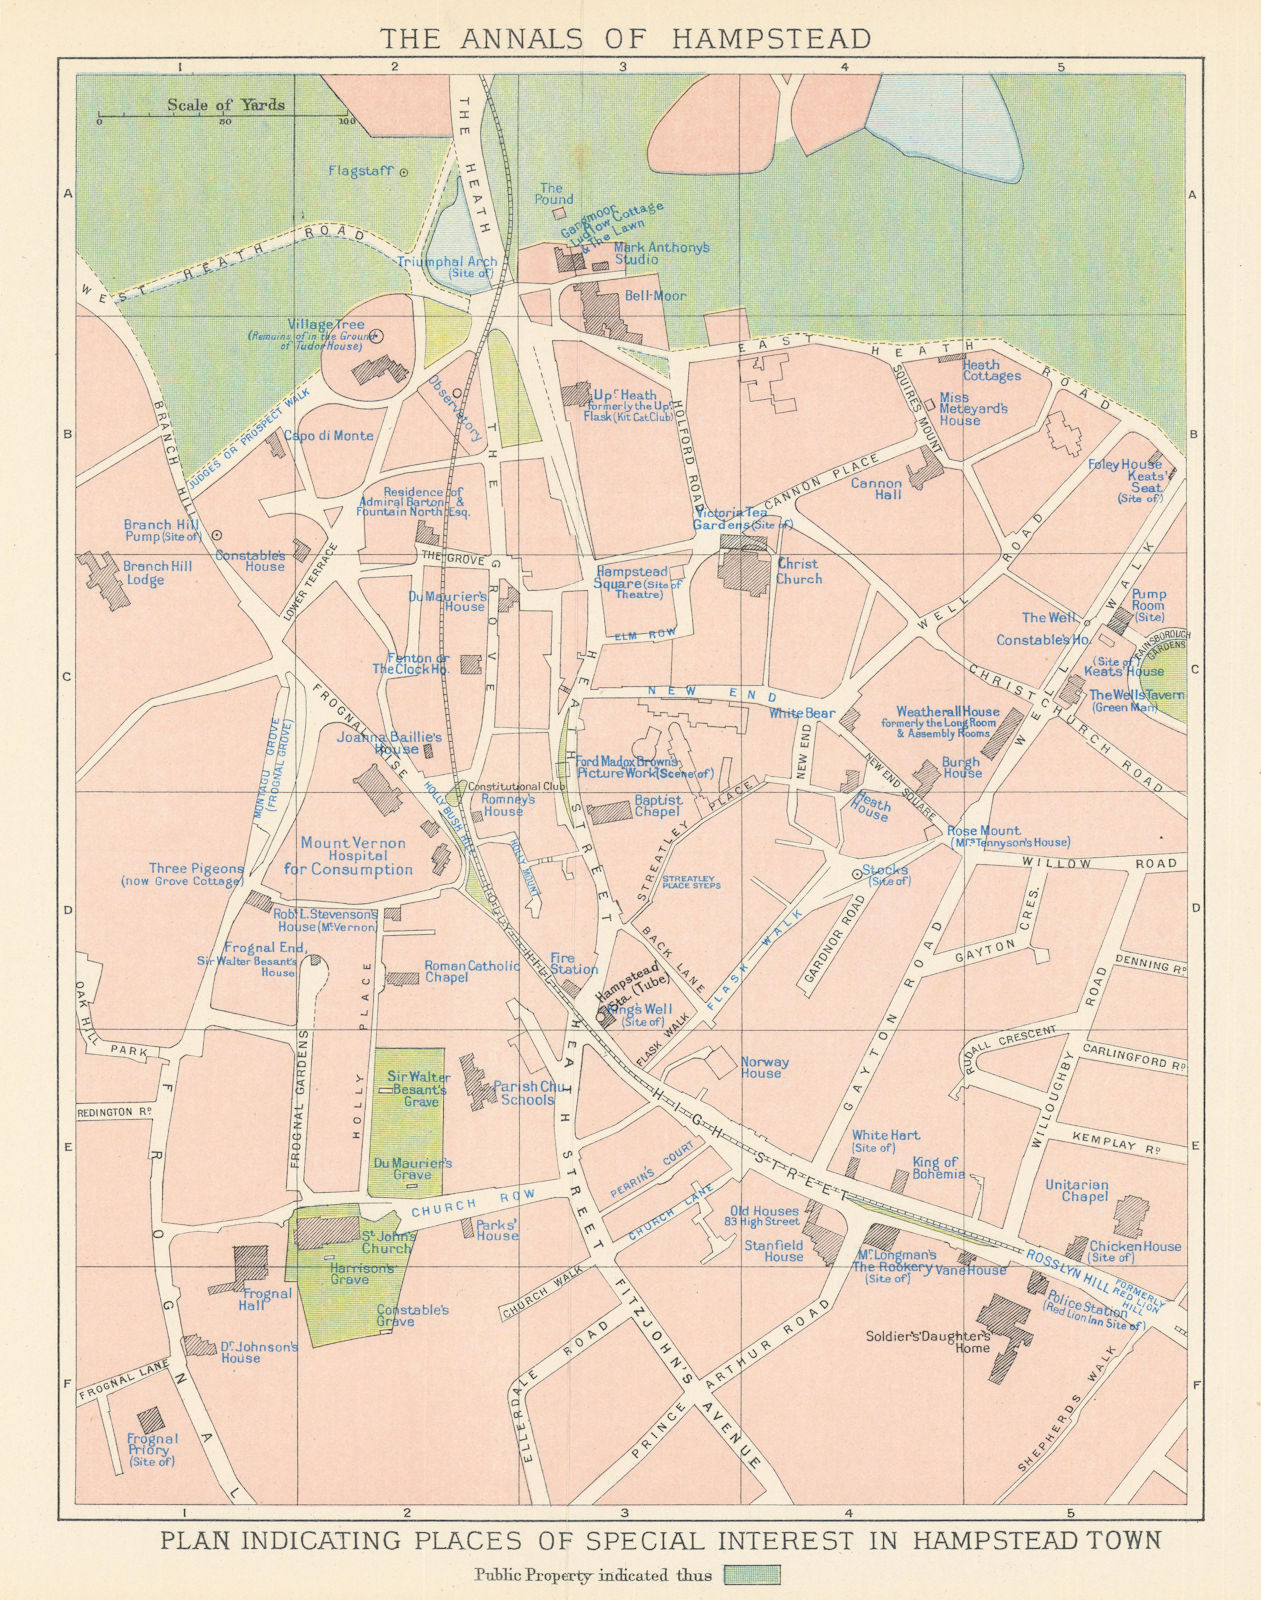 Hampstead Town - Plan indicating places of special interest 1912 old map